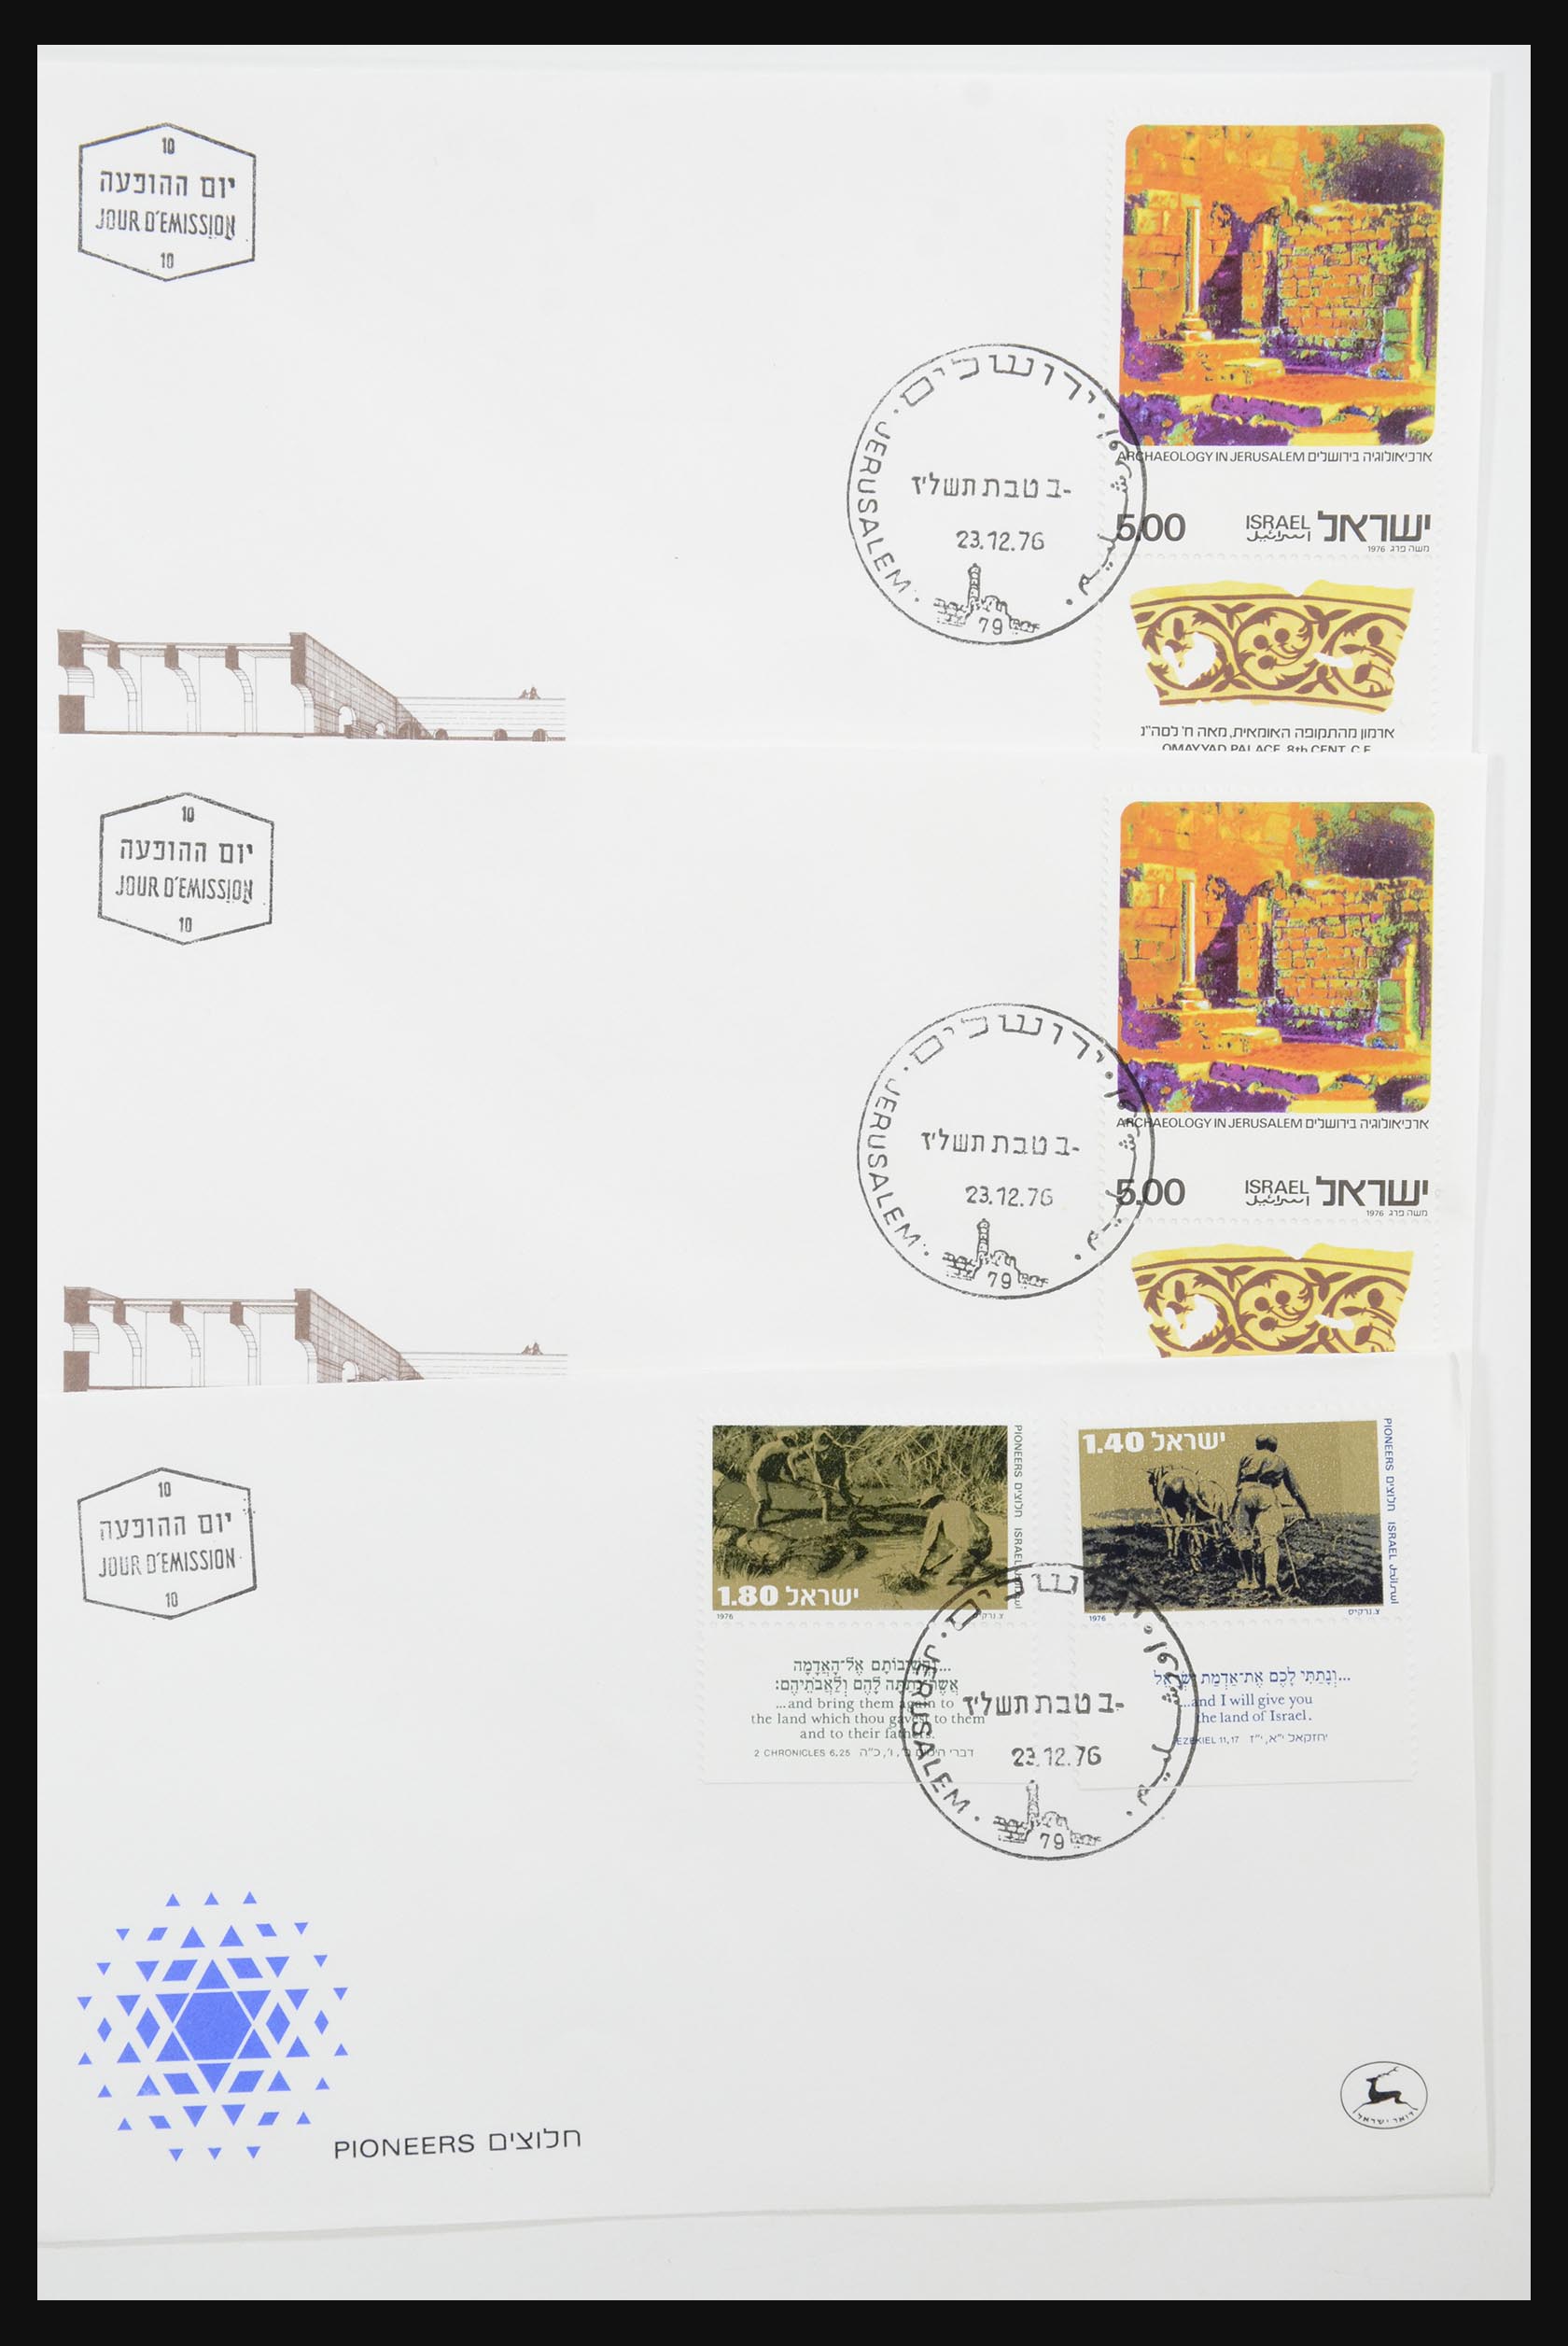 31924 002 - 31924 Israel first day cover collection 1957-2003.